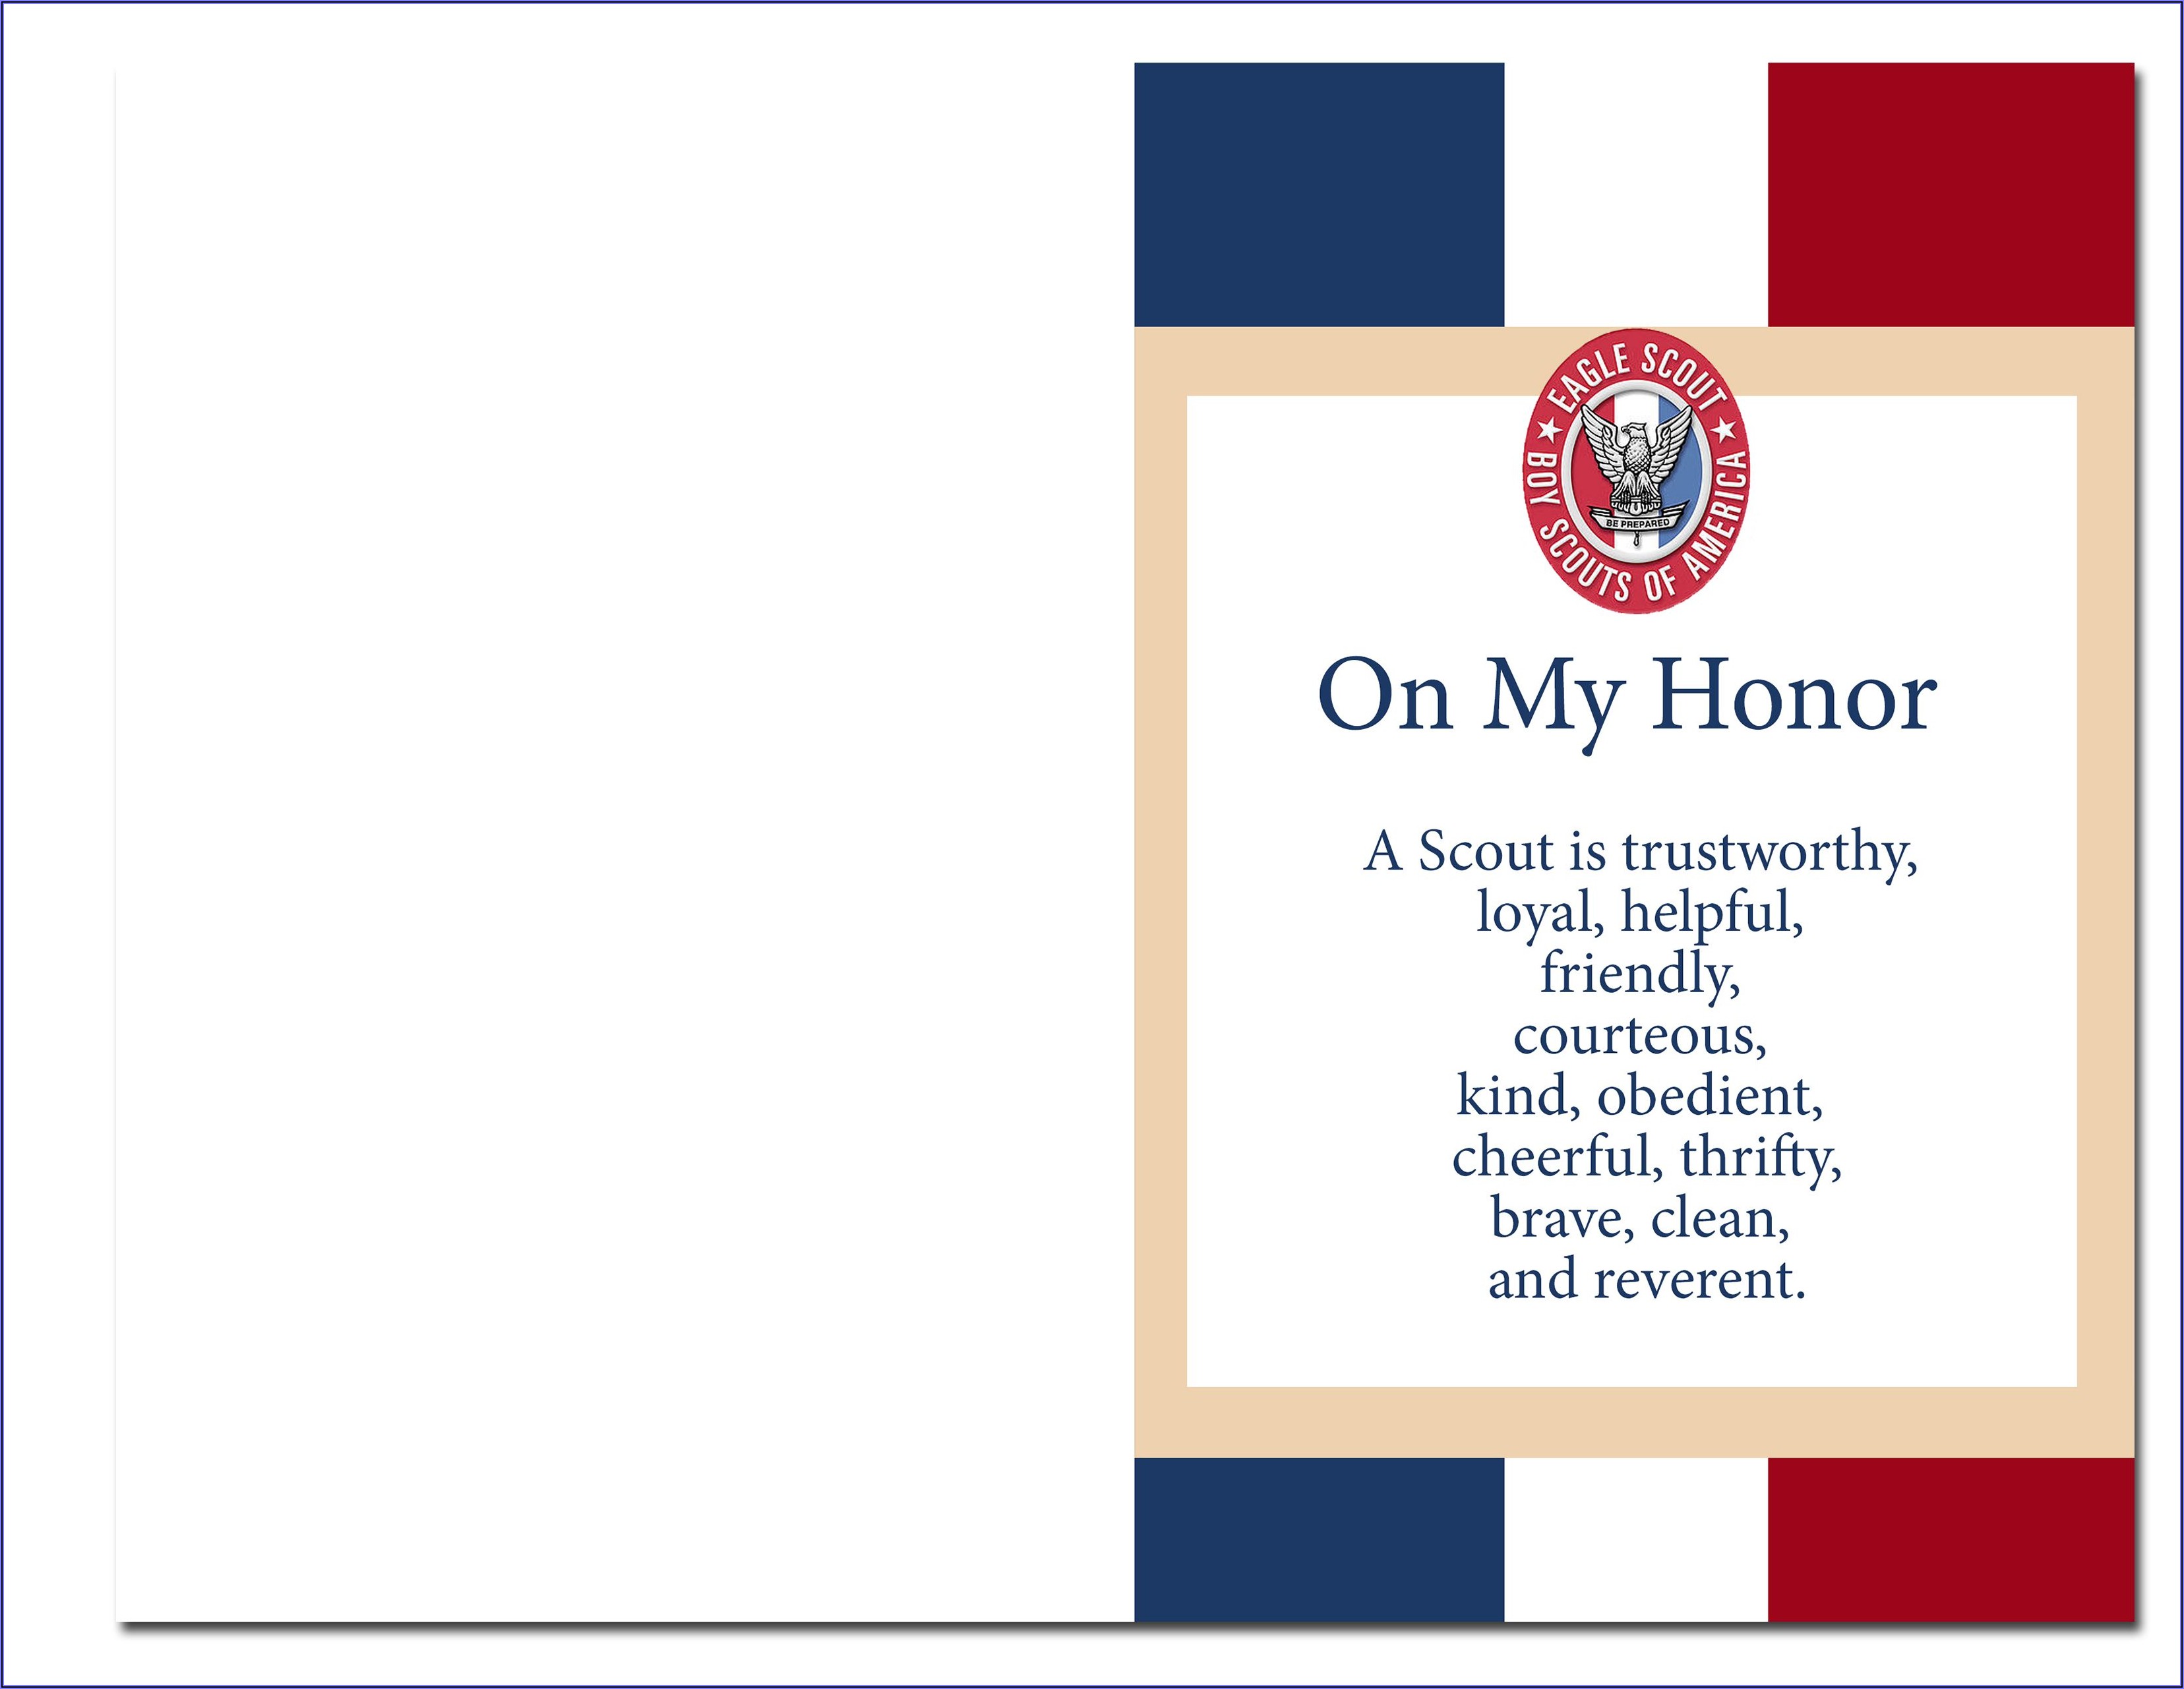 Eagle Scout Court Of Honor Invitations Downloadable